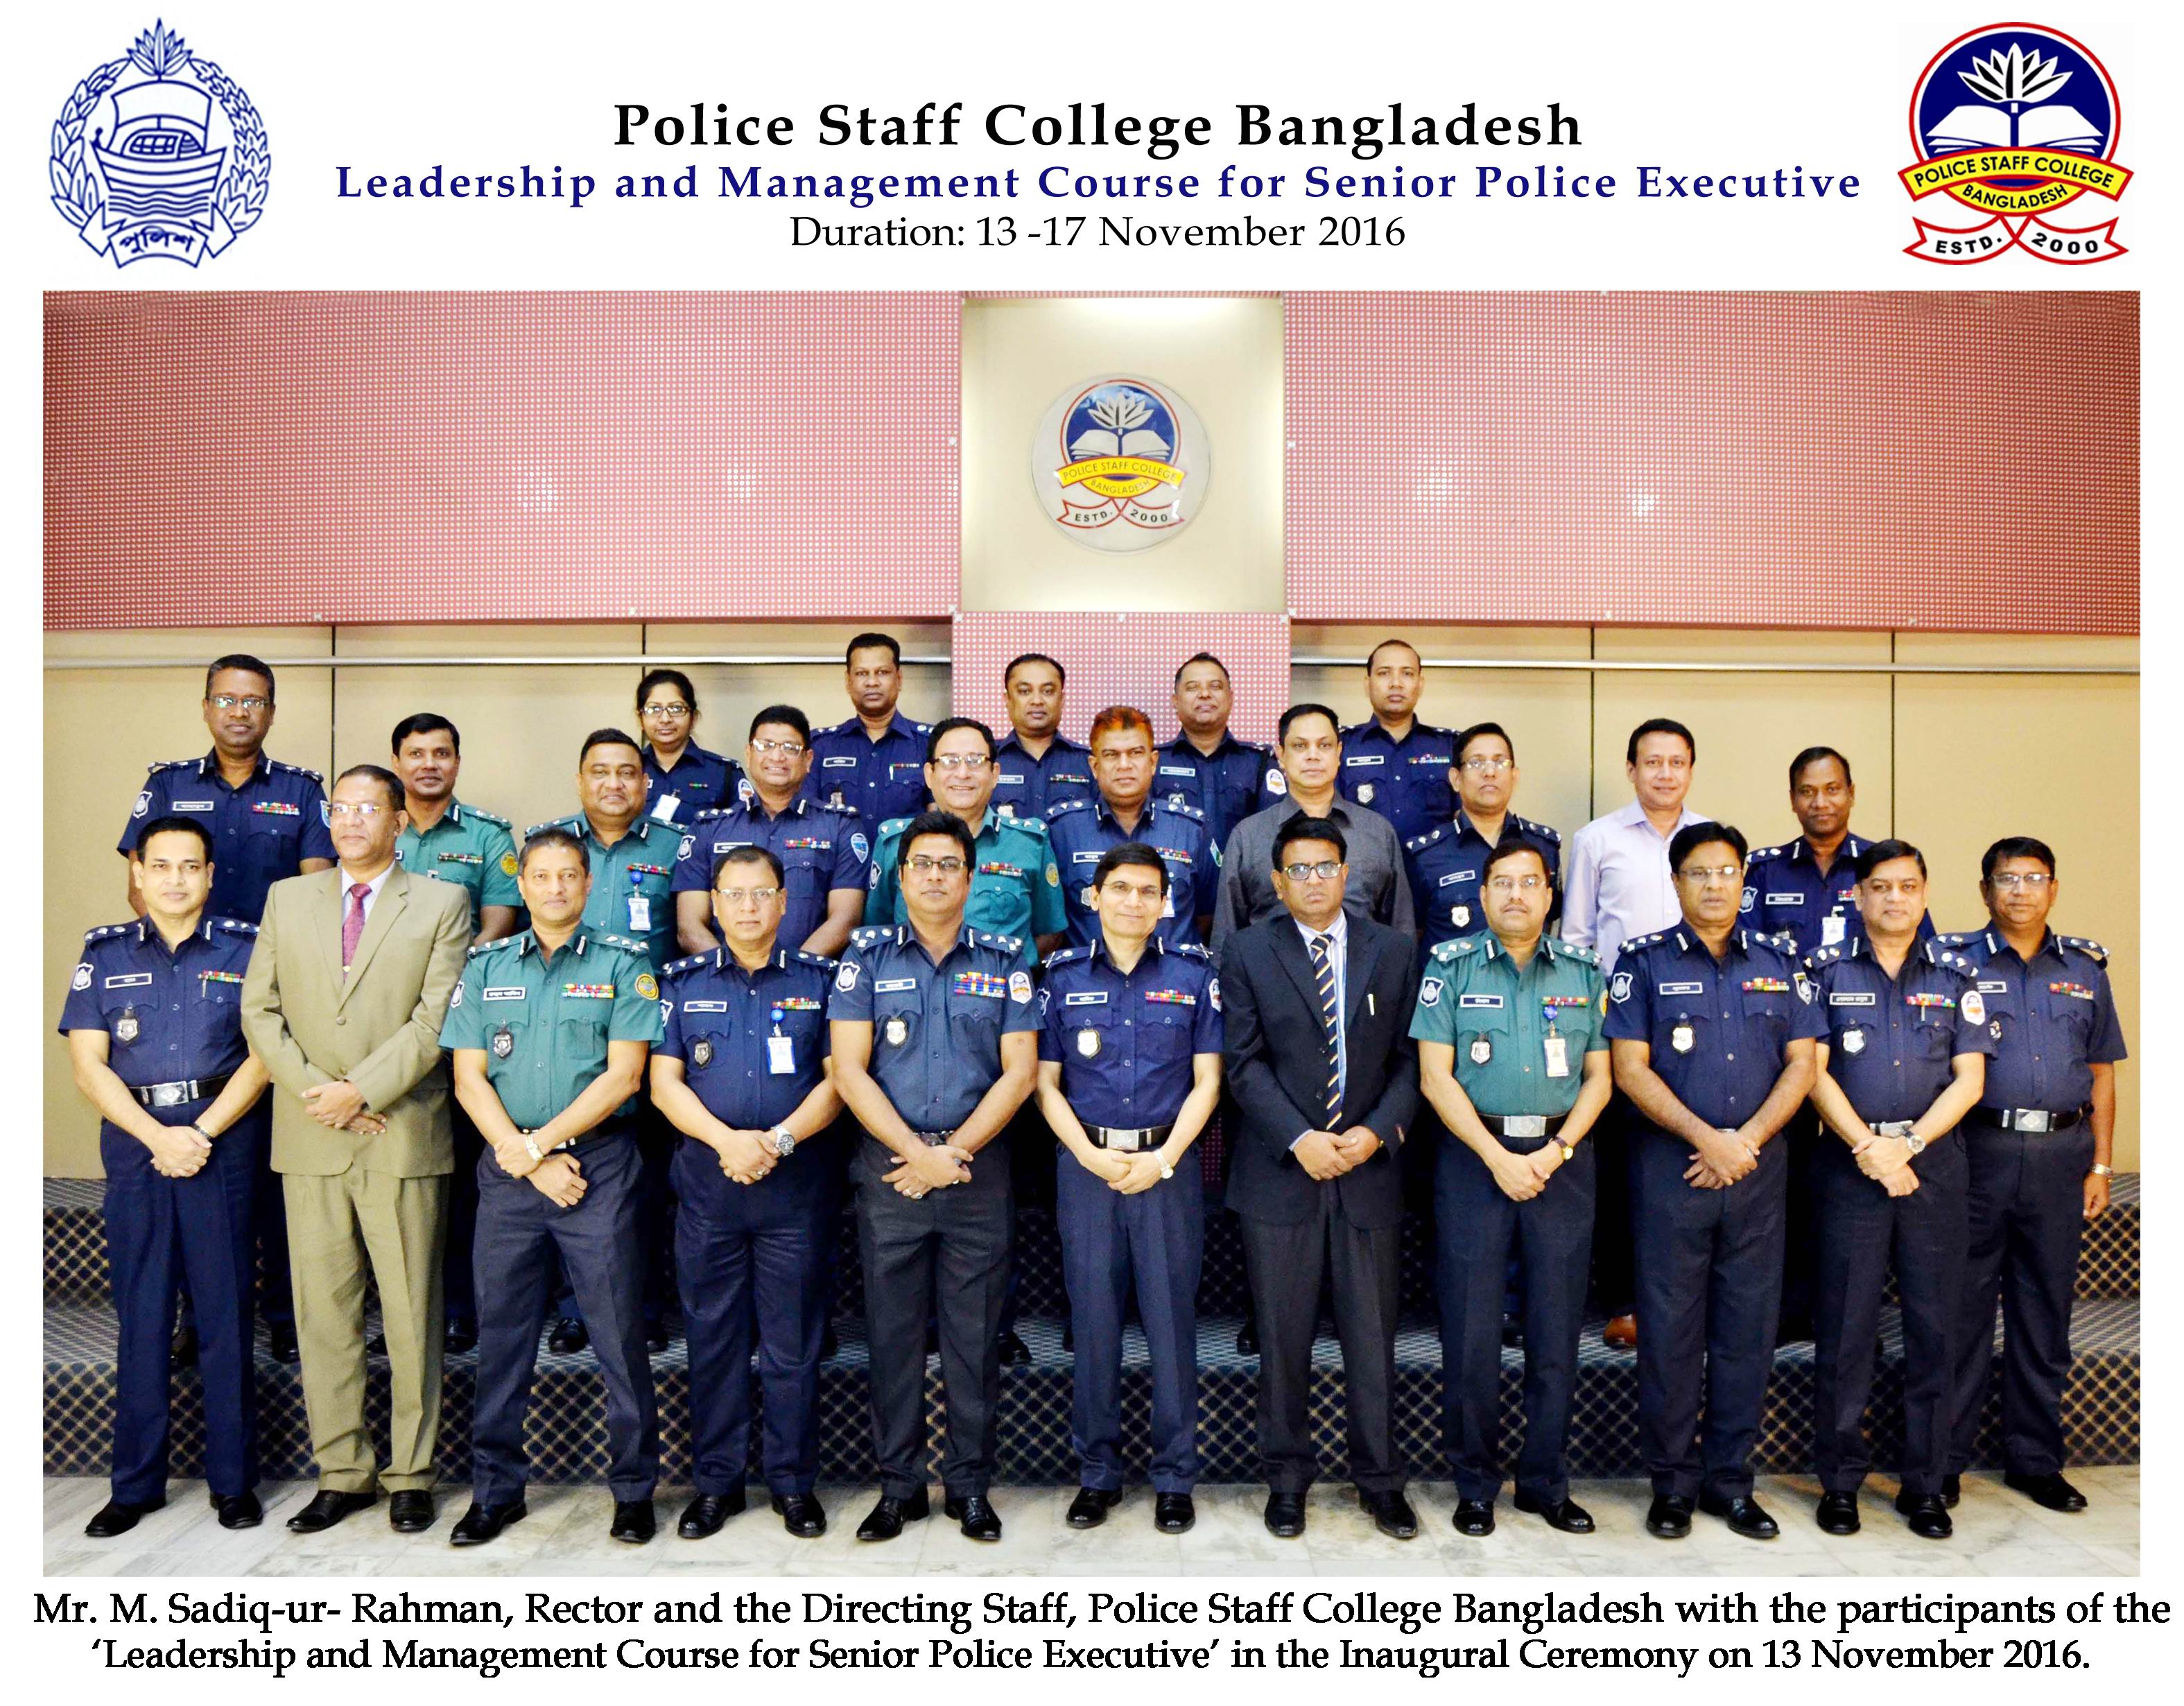 Participant of 2nd Leadership and Management Course for Senior Police Executive (DIG & Addl. DIG)